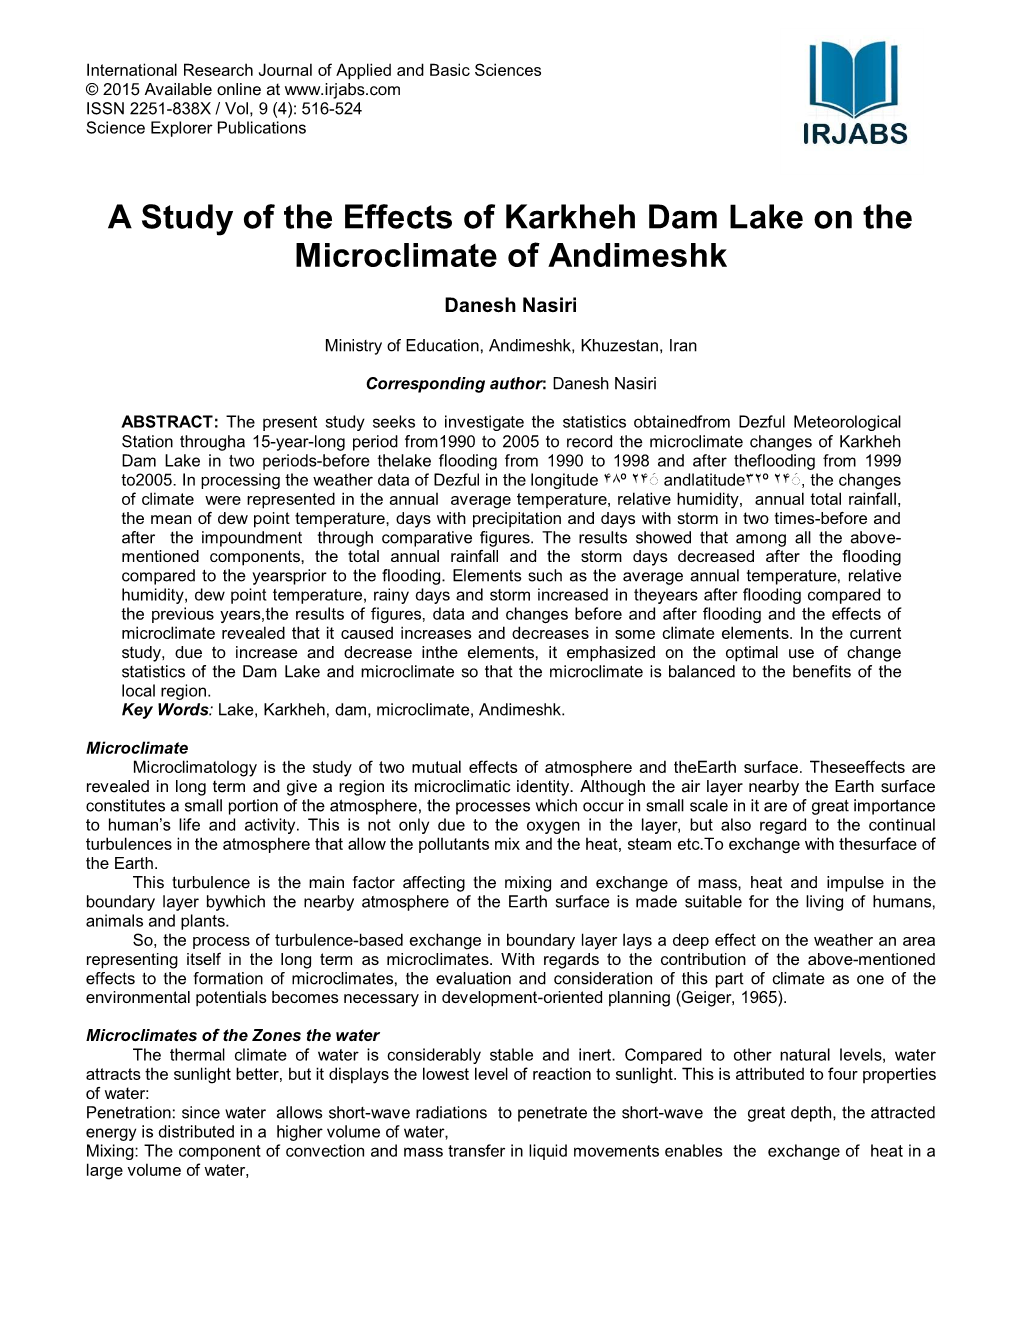 A Study of the Effects of Karkheh Dam Lake on the Microclimate of Andimeshk